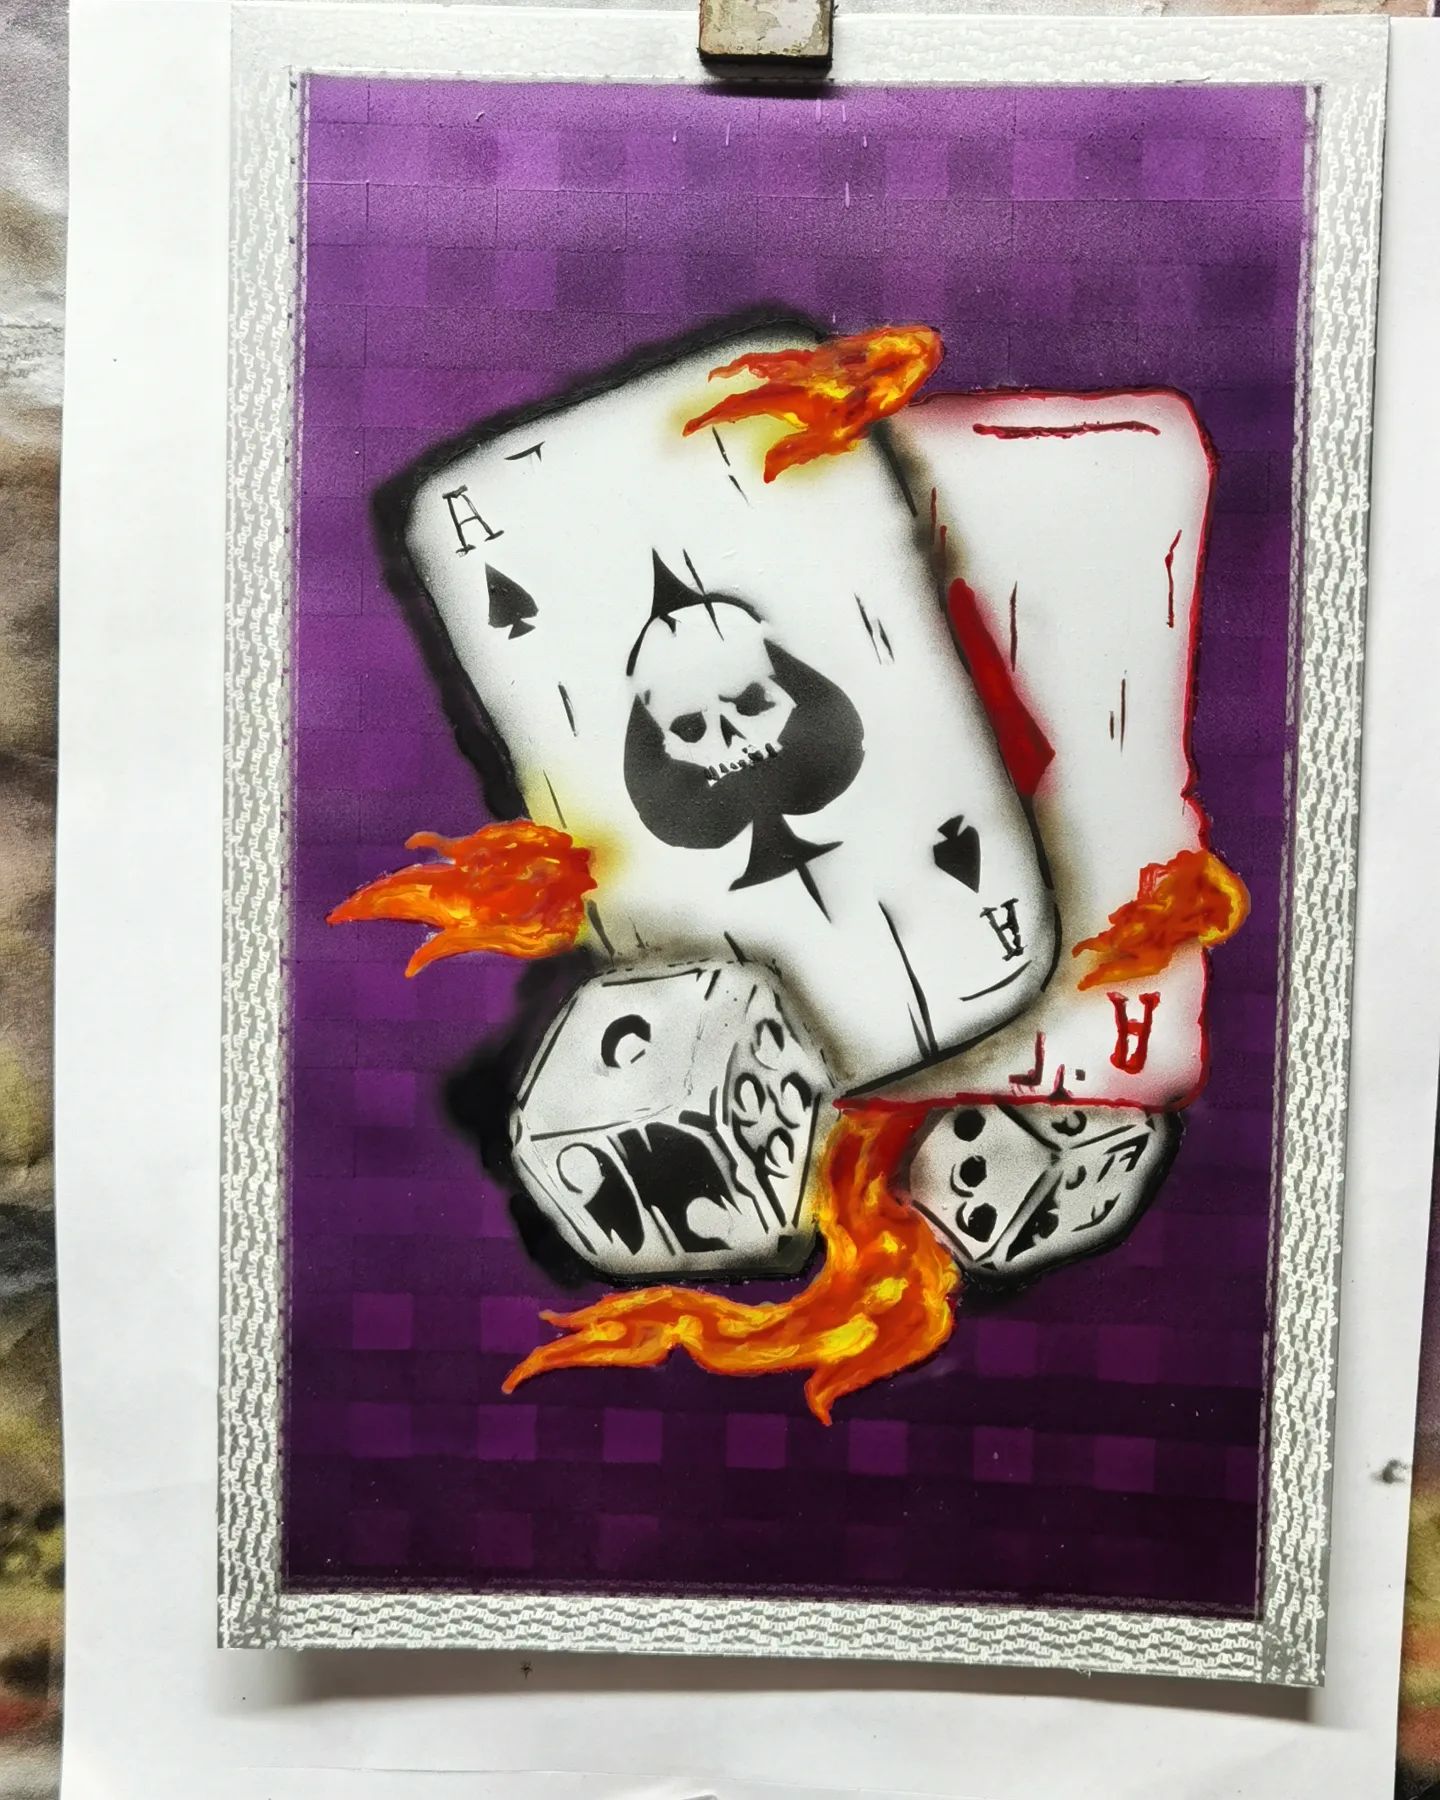 New airbrushartwork. Selfcuttet stencil. Different technics for the background. Just another tryoutpainting. Need a plotter for making stencils. To much work cutting stencils with a scalpell.  #airbrush #airbrushart #airbrushpainting #airbrushing #skulls #flames #cards #aceofspades #dices #gambling